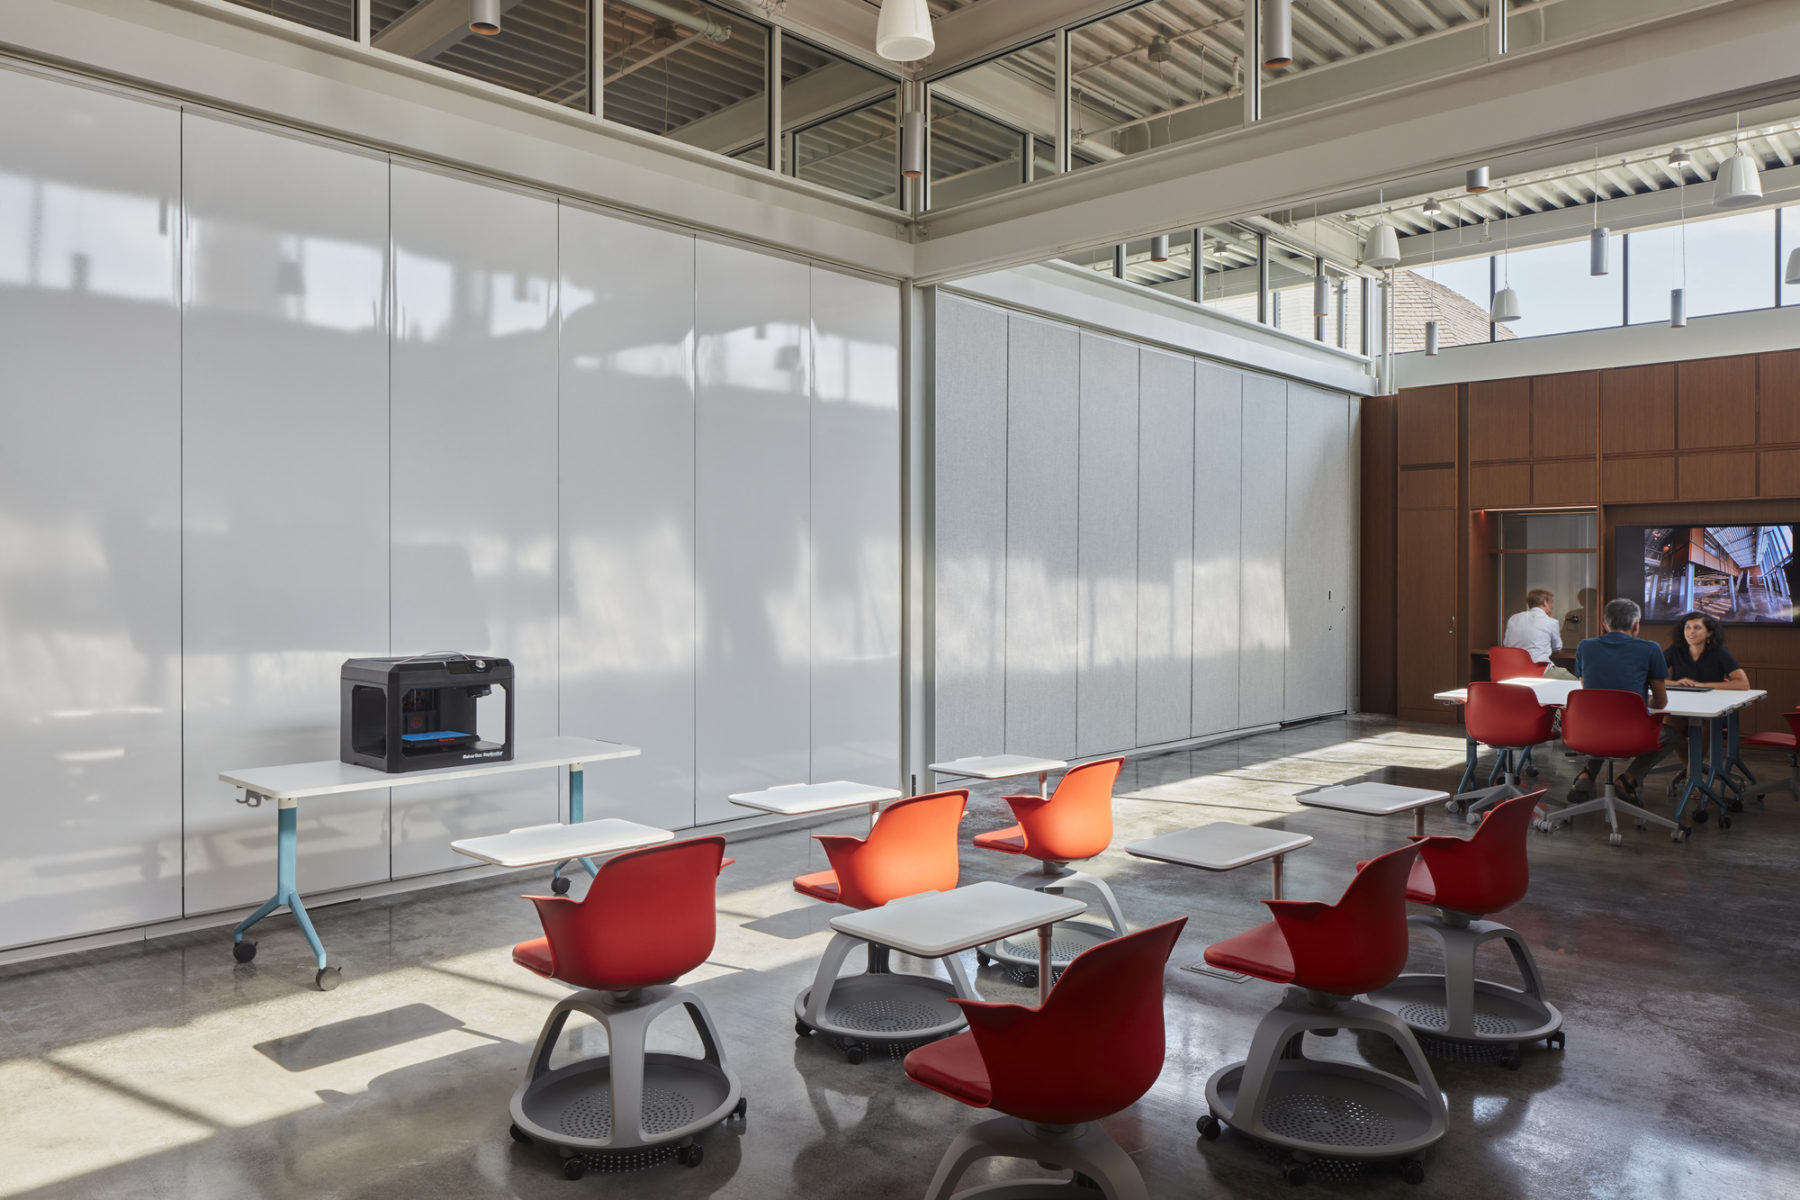 open classroom space, half open with moveable walls